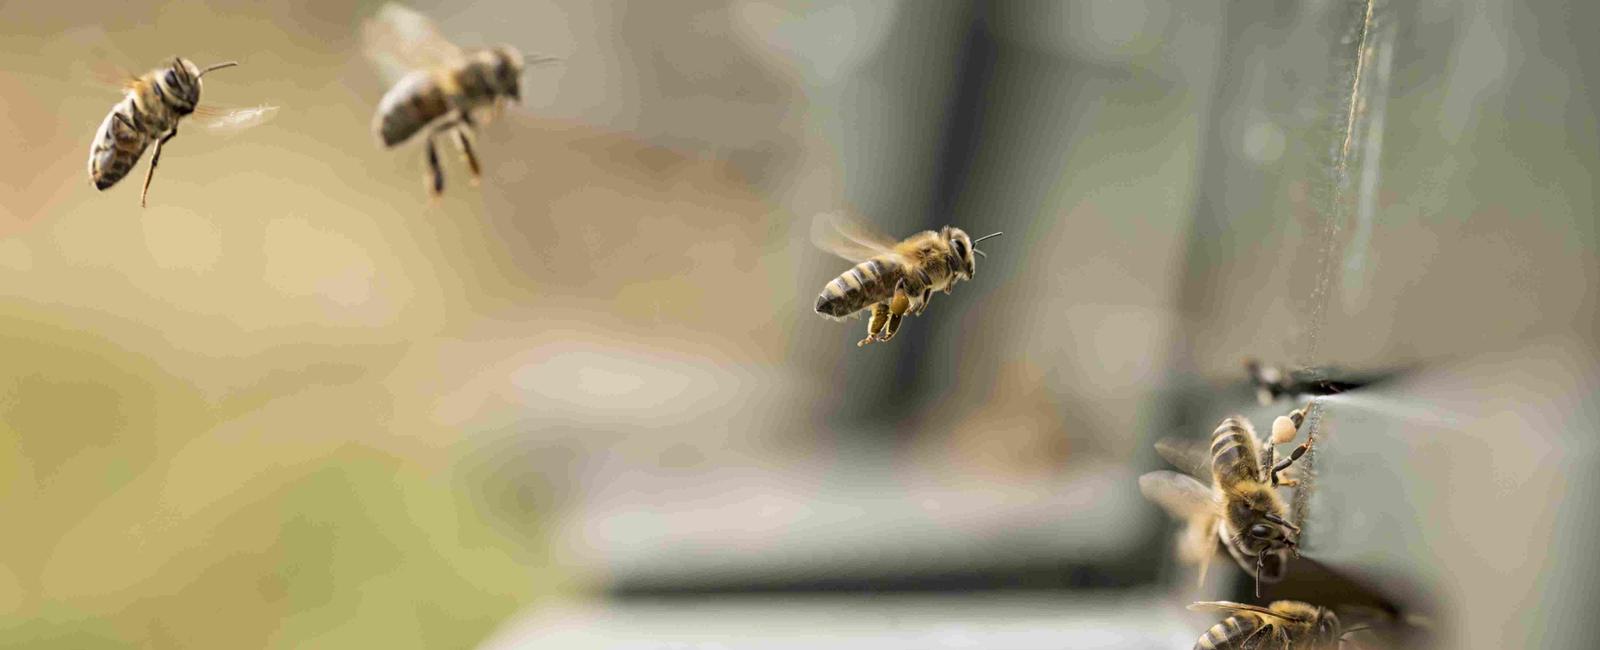 A honeybee can fly at fifteen miles per hour and they re capable of flying 20 miles per hour